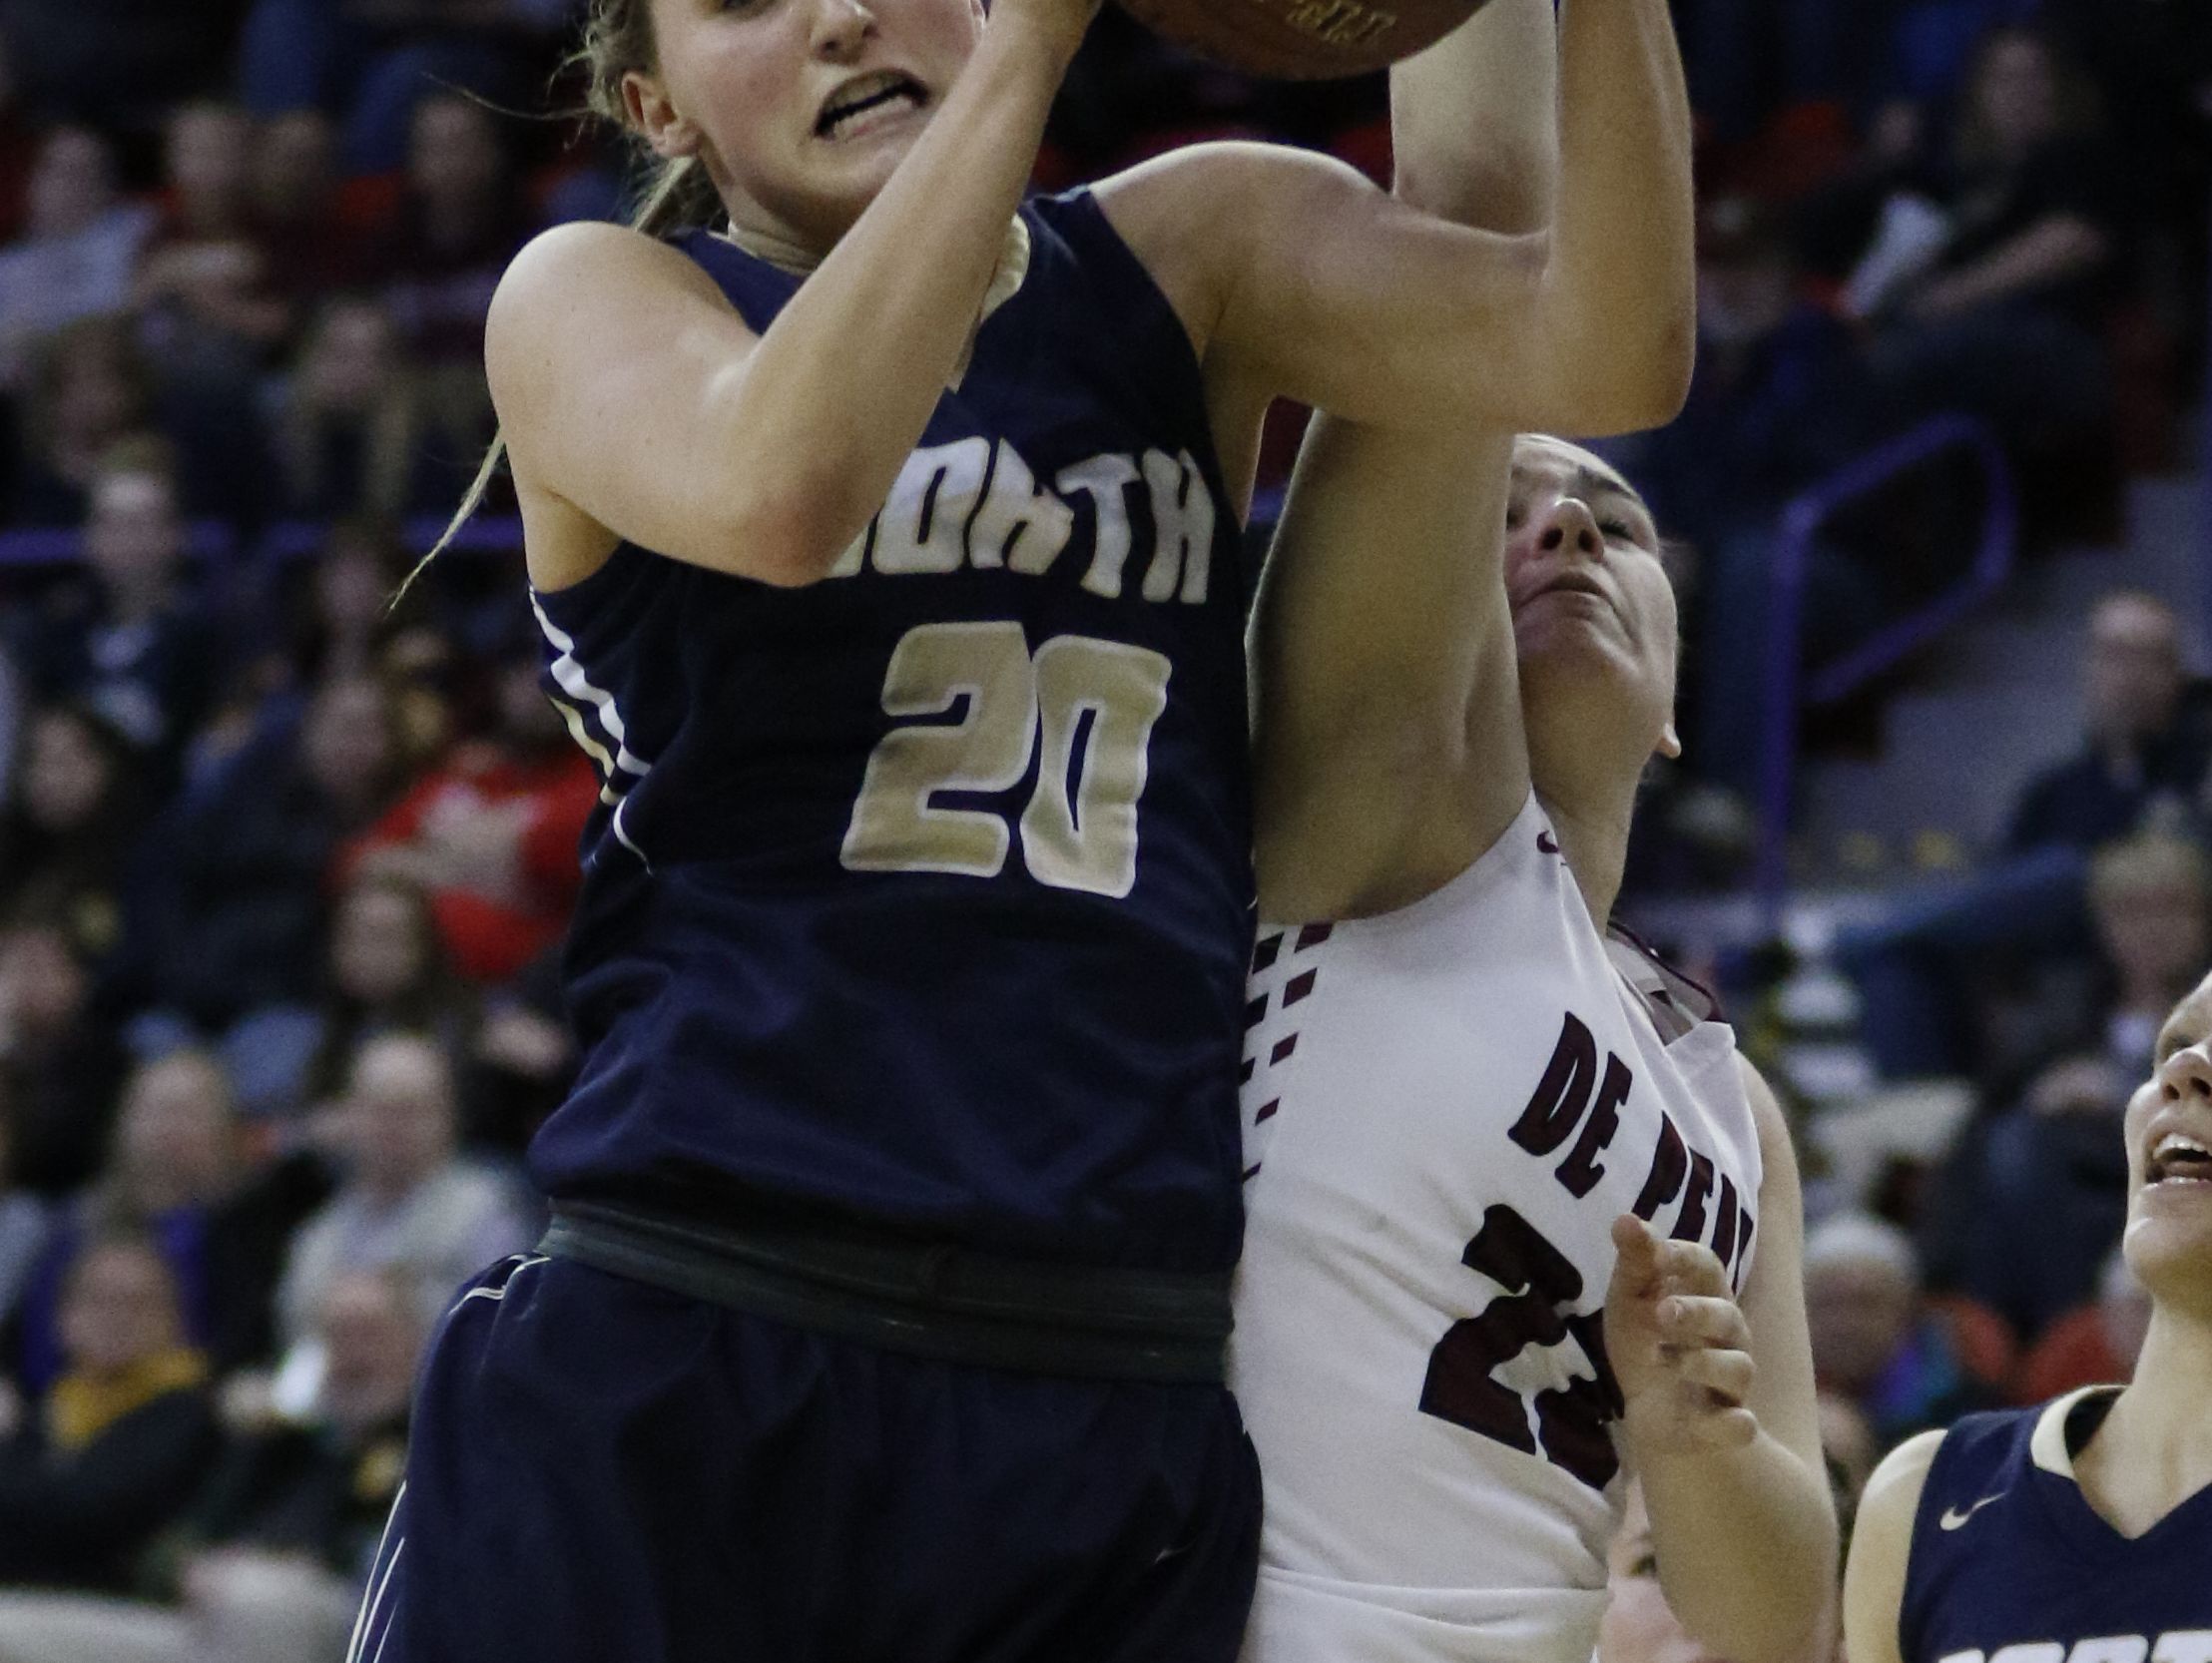 De Pere High School's Lexi Cerrato loses a rebound to Appleton North High School's Sydney Levy during their WIAA Division 1 State Tournament girls basketball championship game Saturday, Mar. 11, 2017, at the Resch Center in Ashwaubenon, Wis. Josh Clark/USA TODAY NETWORK-Wisconsin